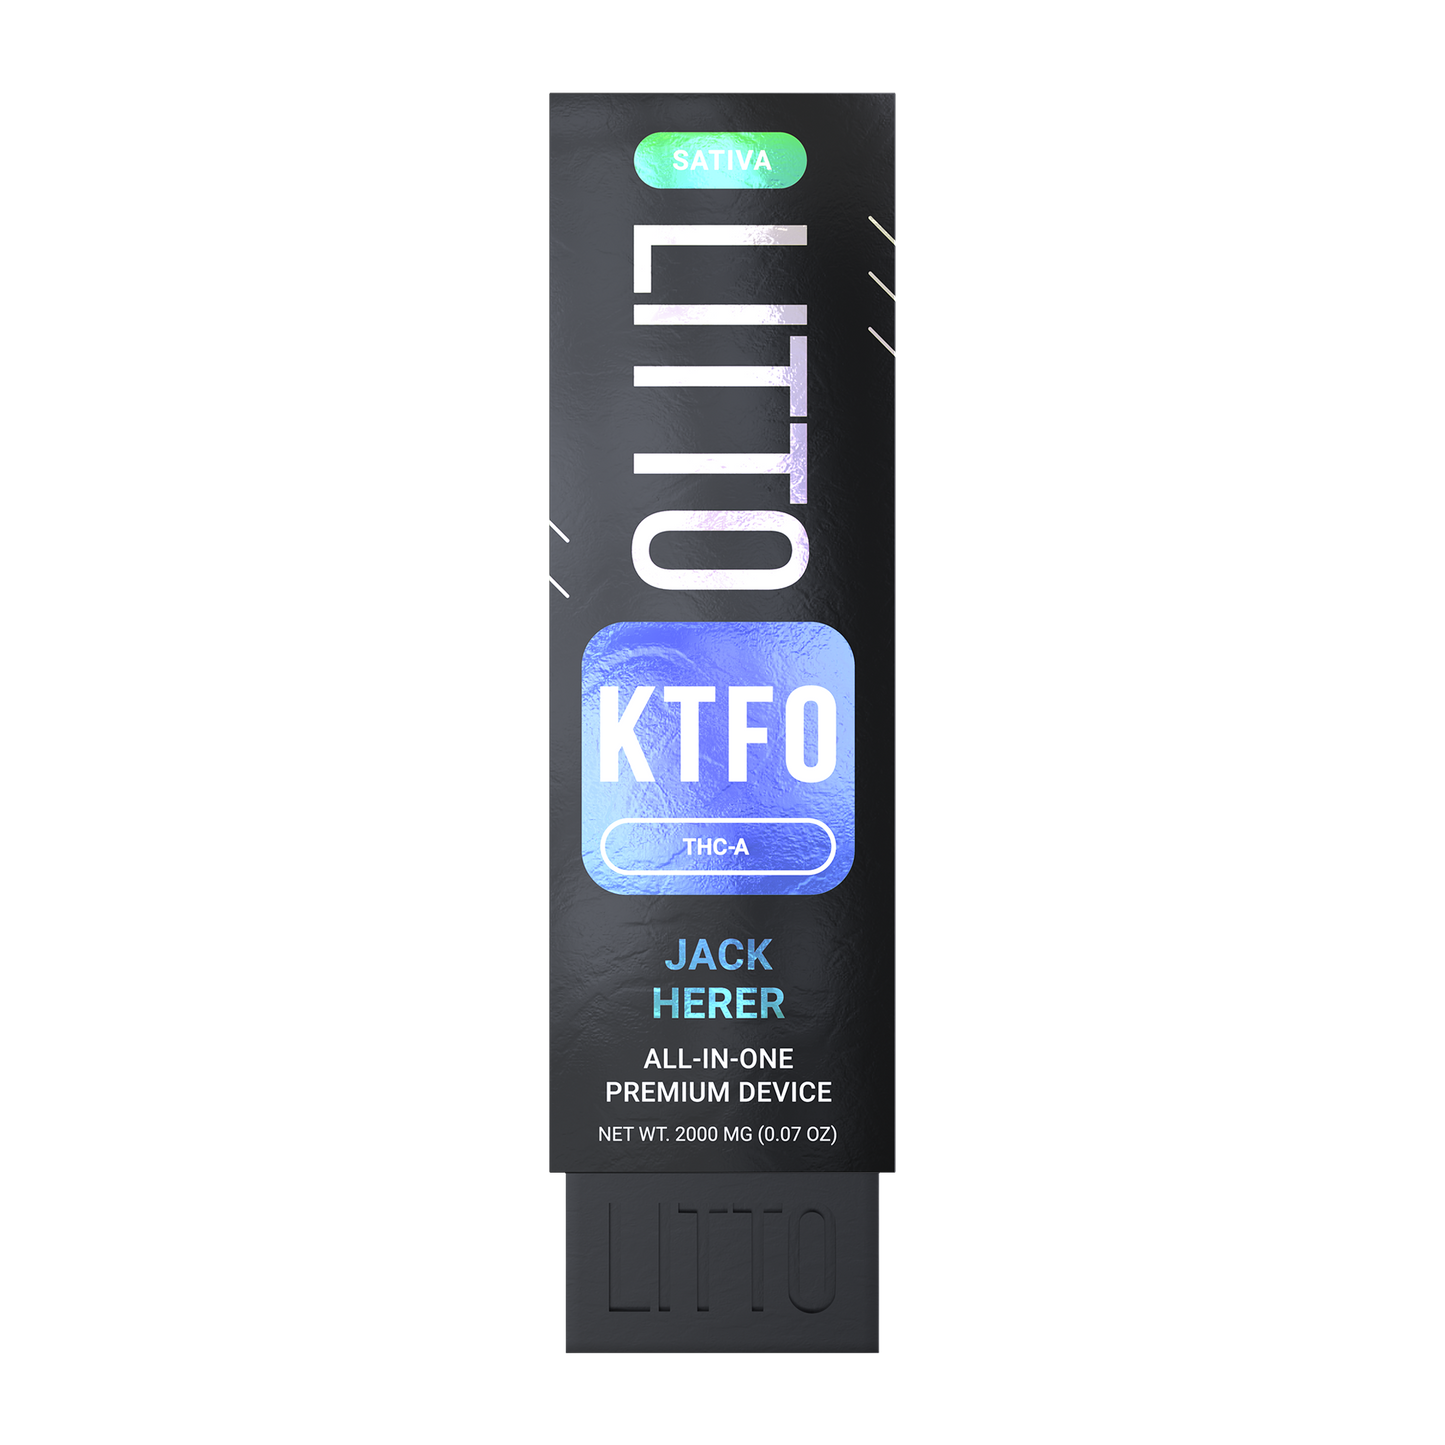 All-in-One Device - KTFO - THCA - Jack Herer - 2G